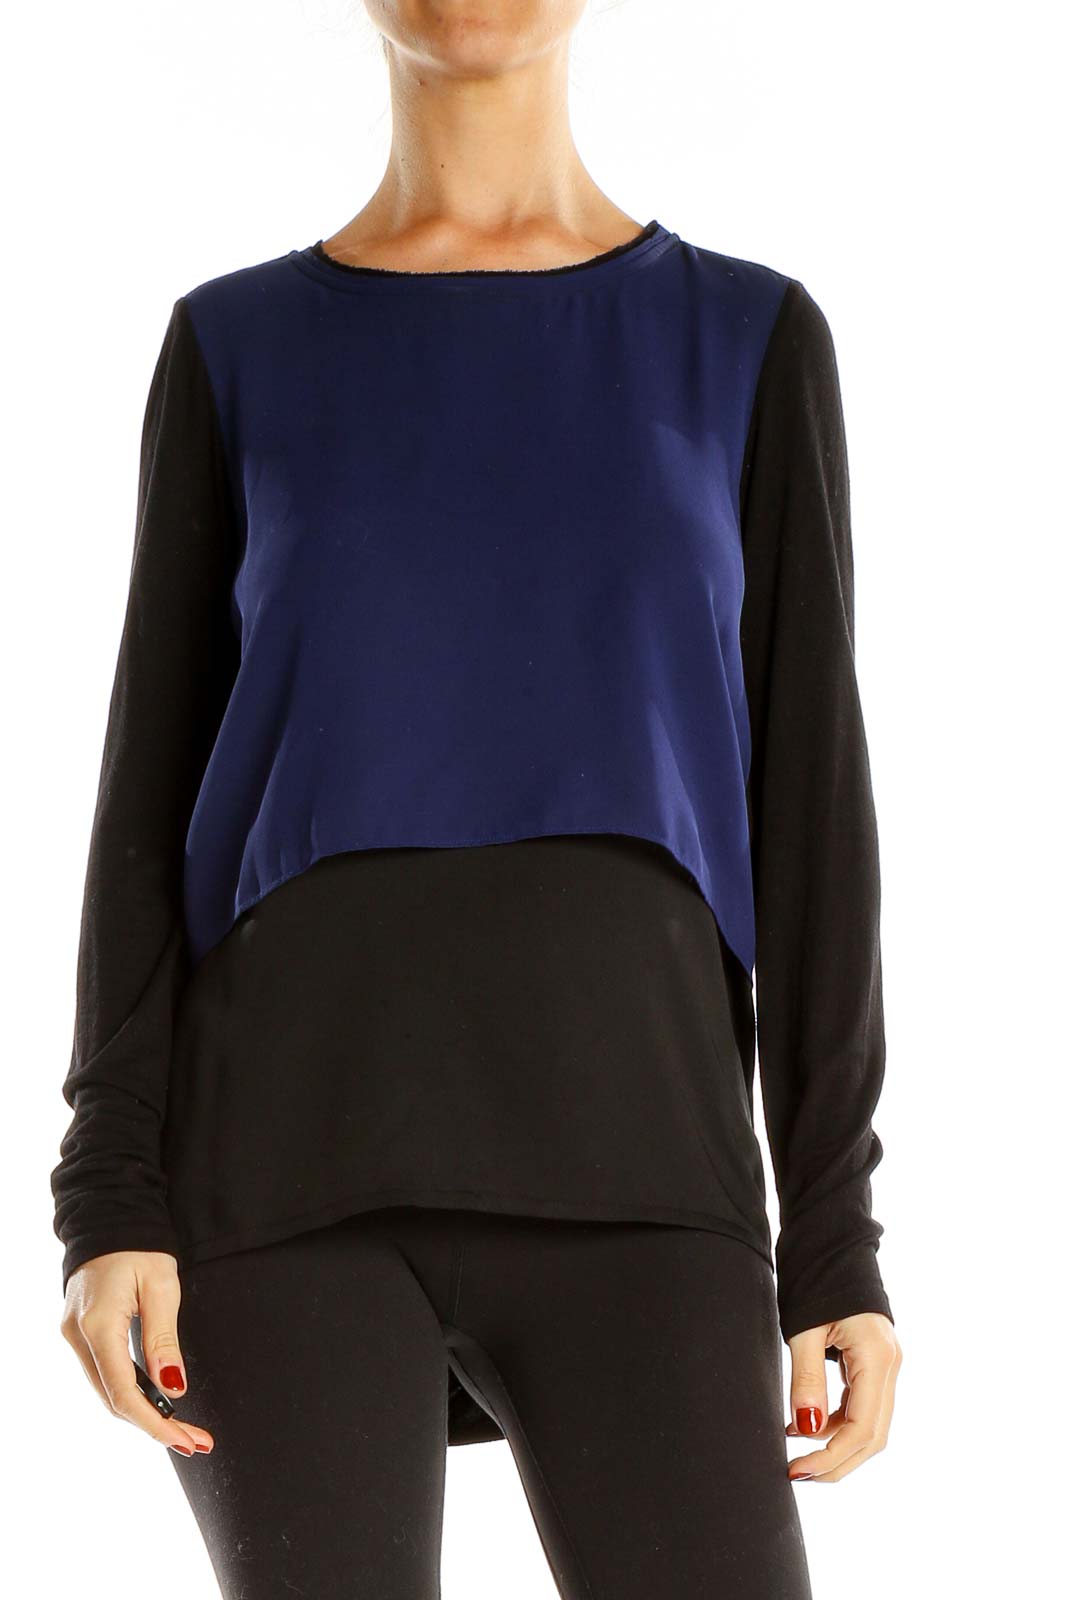 Blue Black Colorblock Layered All Day Wear Top Front